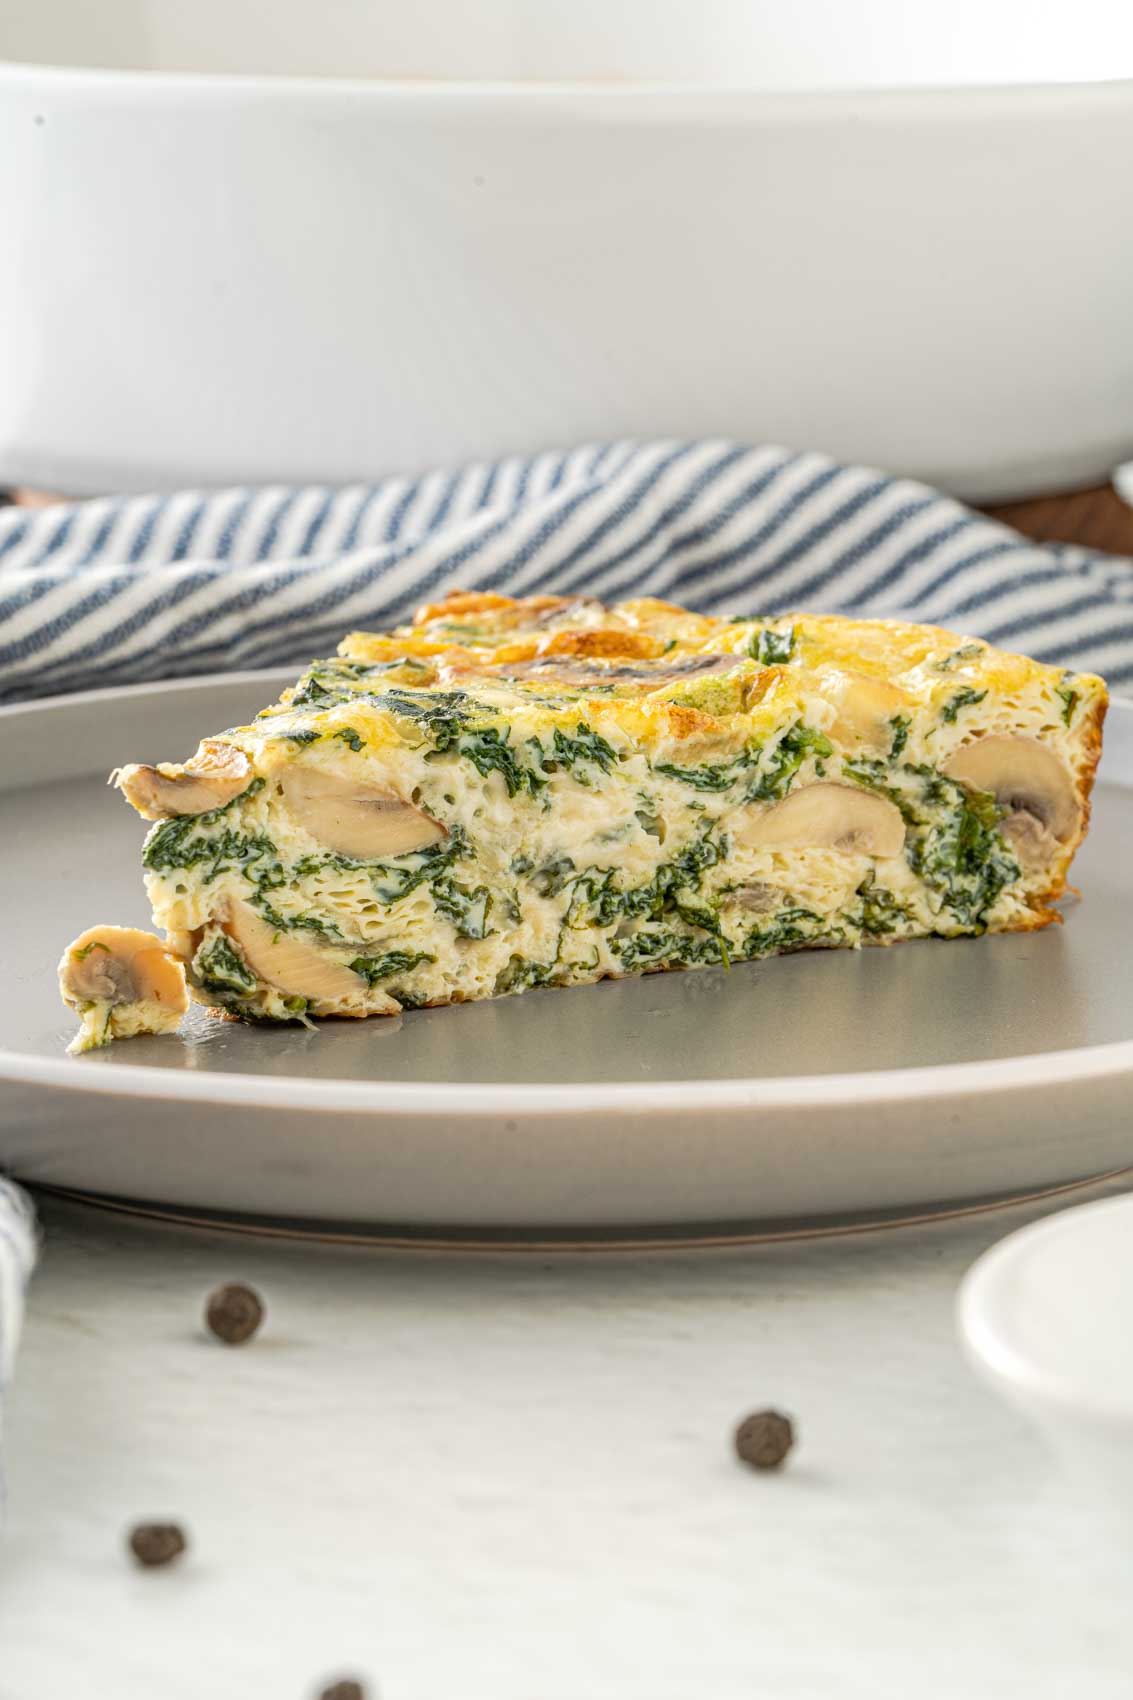 a slice of fluffy frittata stuffed with mushrooms and spinach inside a golden crust